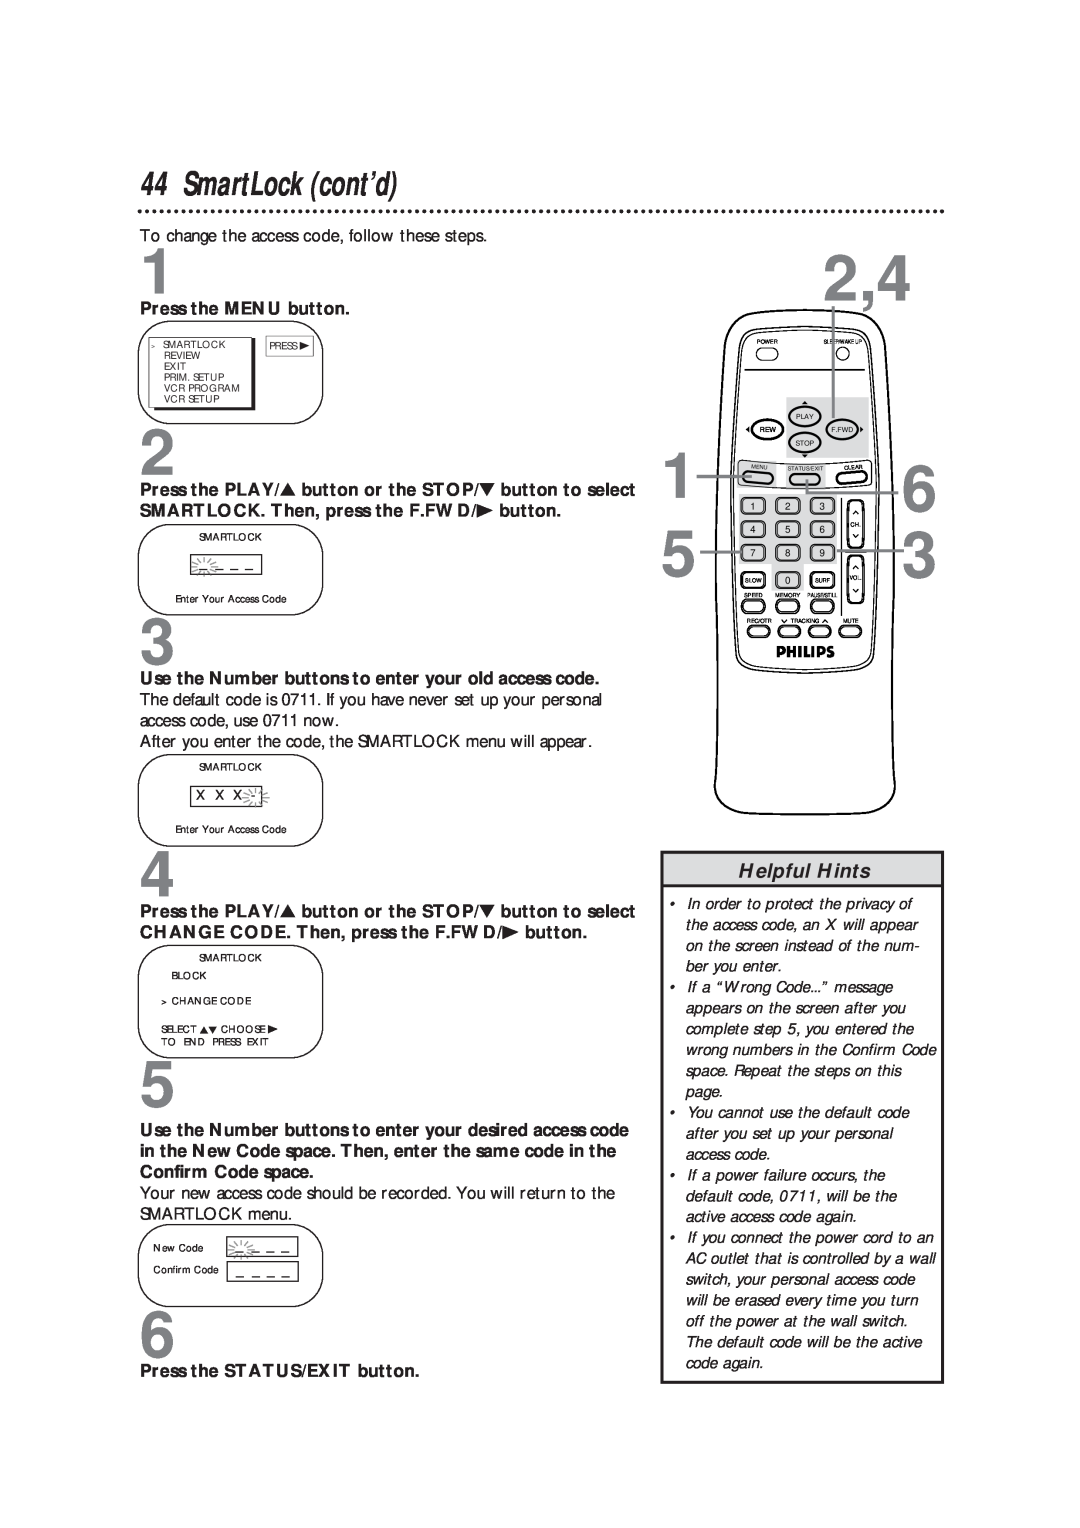 Magnavox CCB193AT owner manual SmartLock cont’d, Helpful Hints, To change the access code, follow these steps 